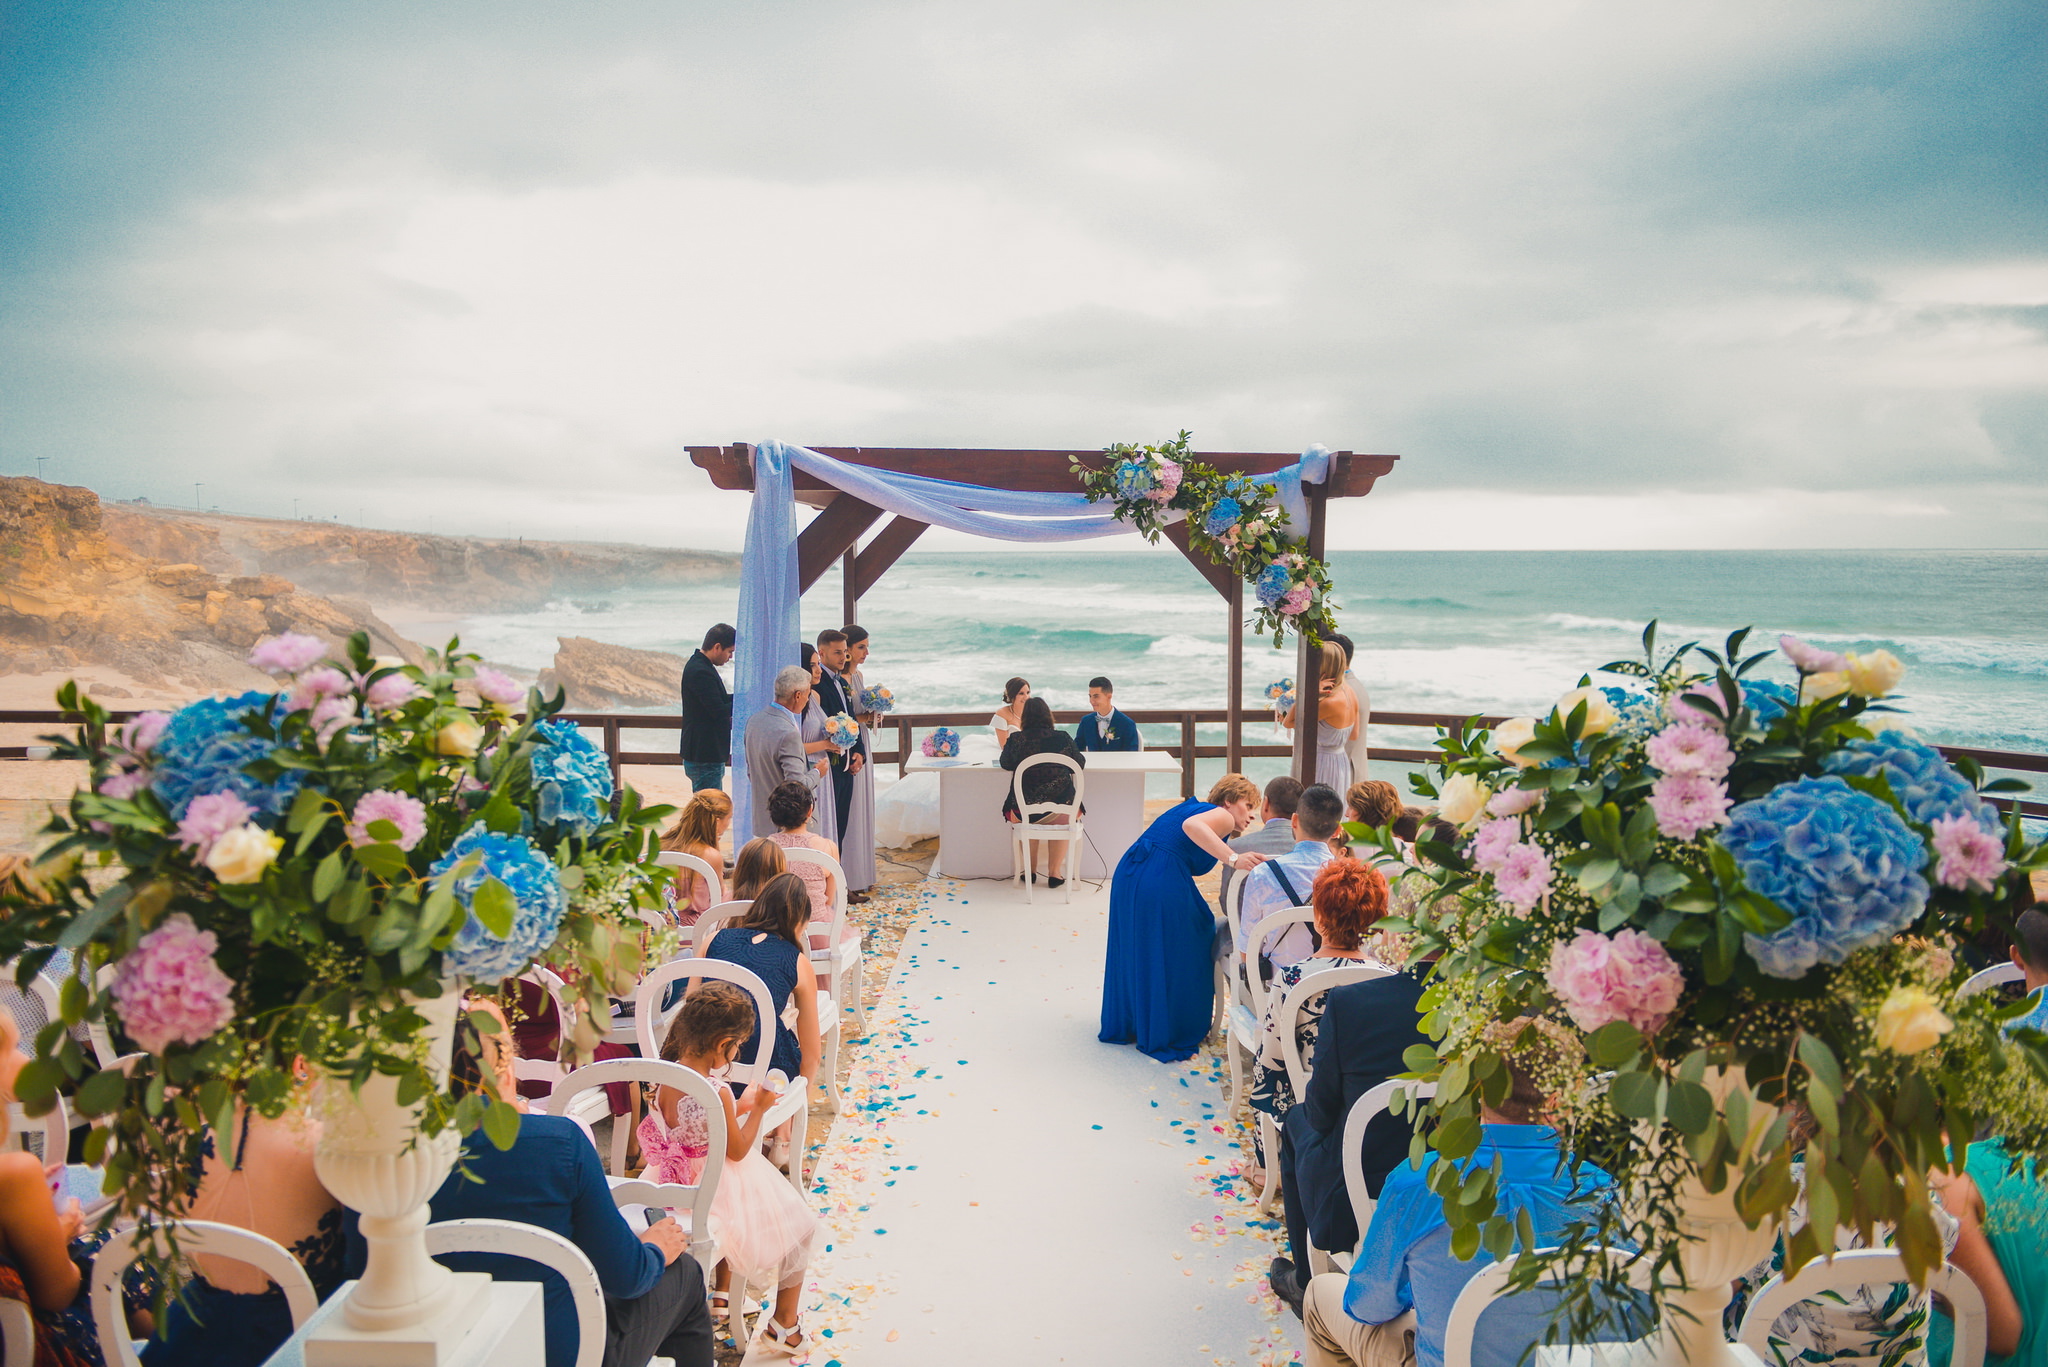 Créditos: About Events - Portugal wedding planners